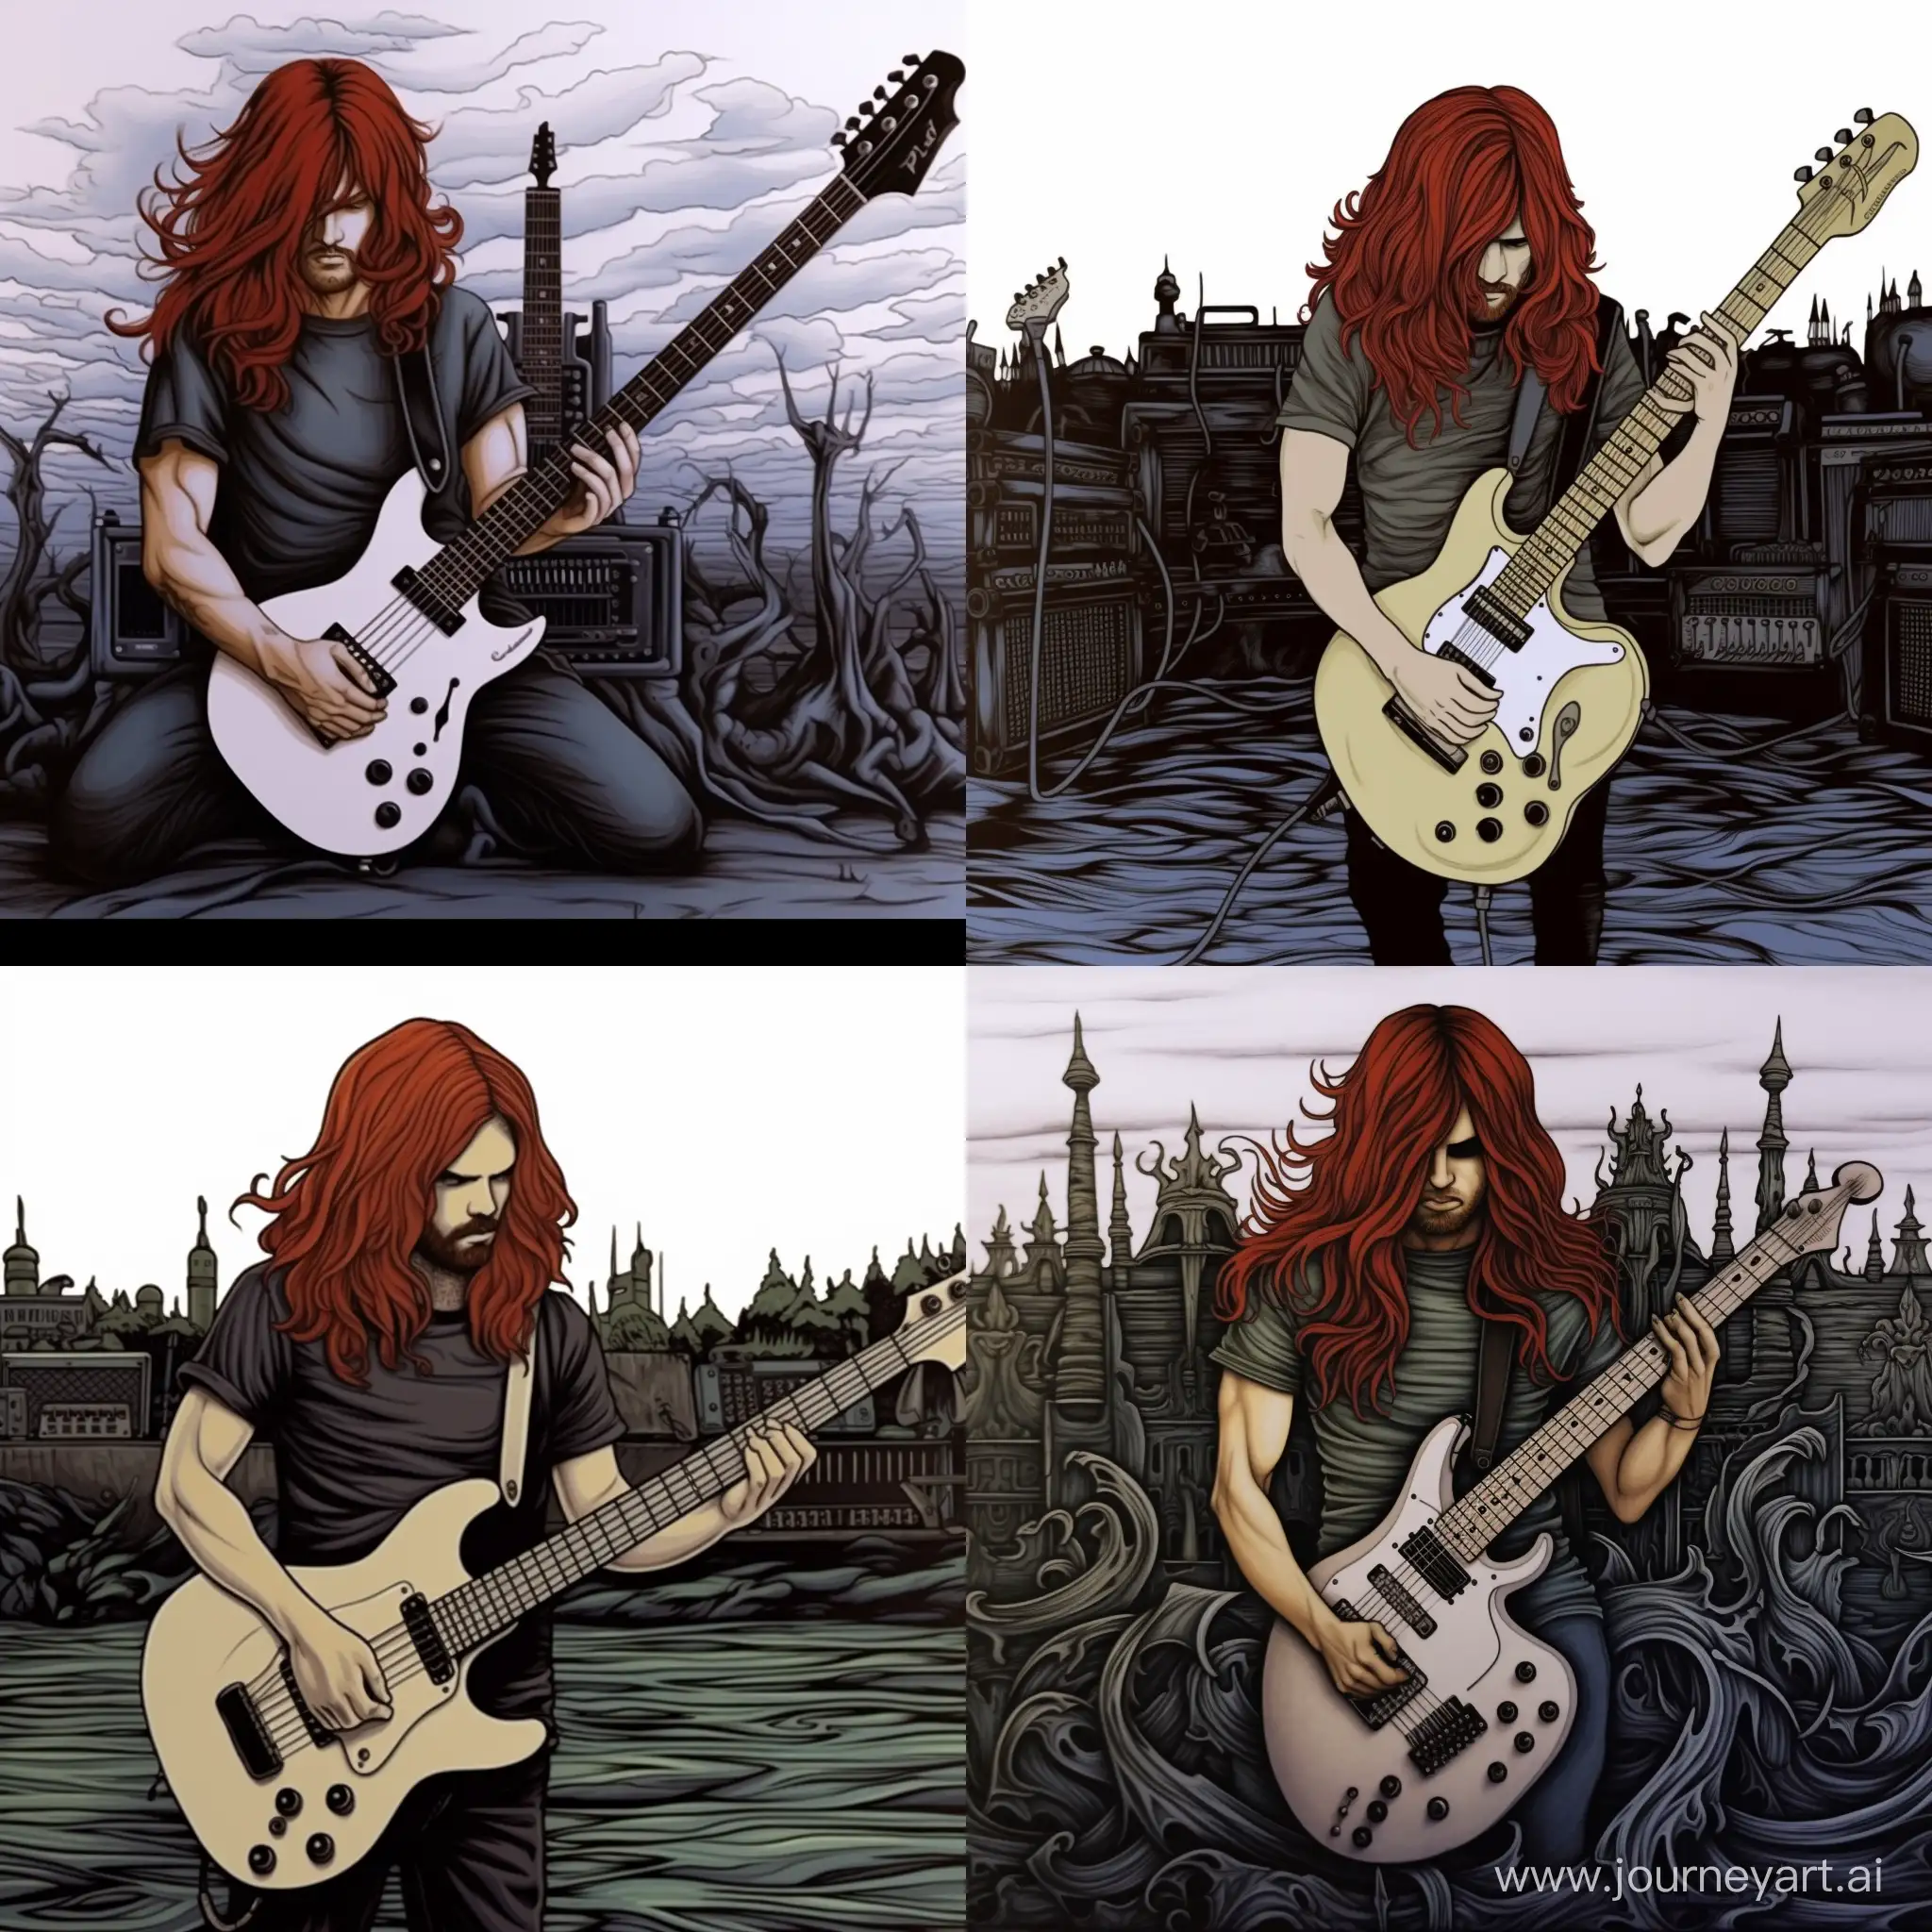 draw a boy with long red hair, a bare torso and an electric guitar in his hands